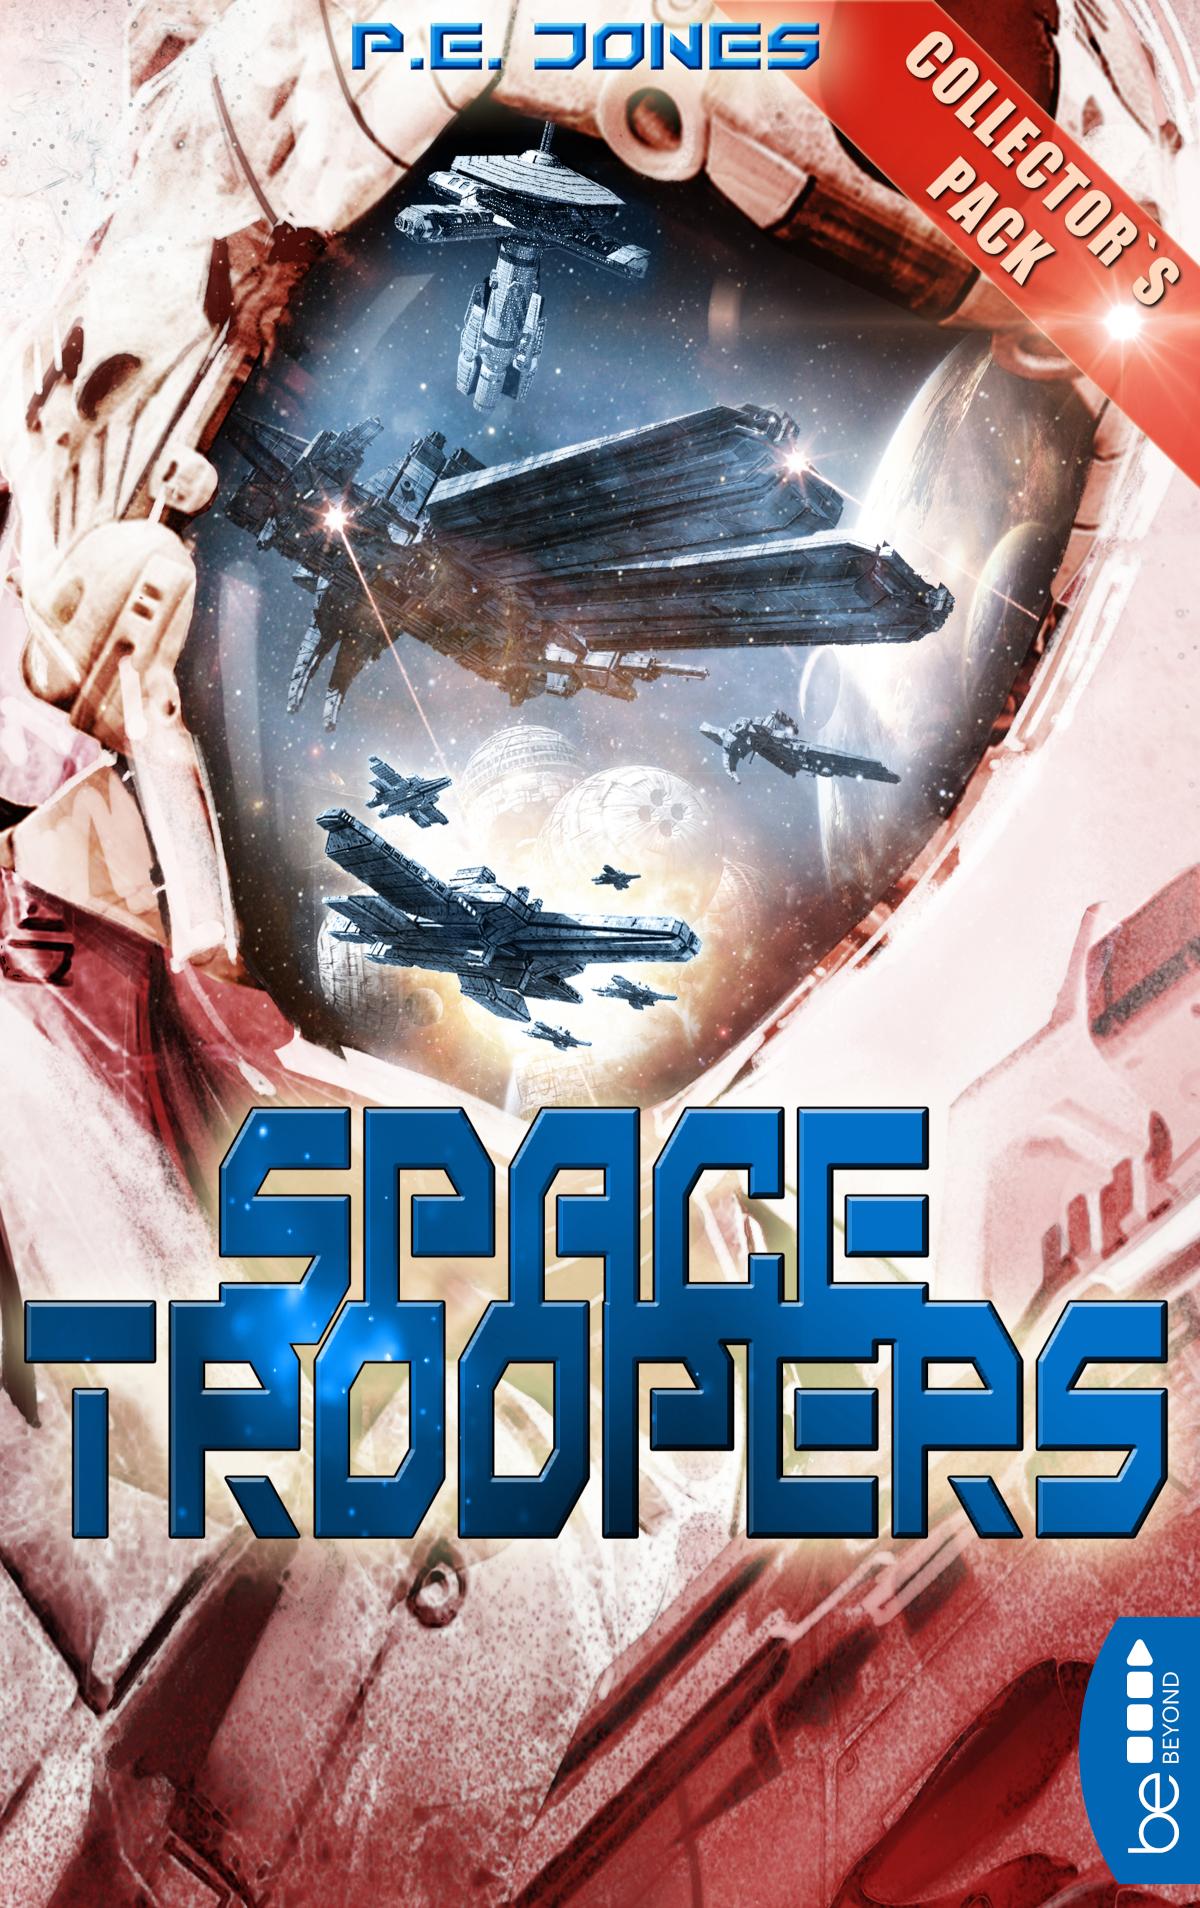 Space Troopers - Collector's Pack Folgen 7-12